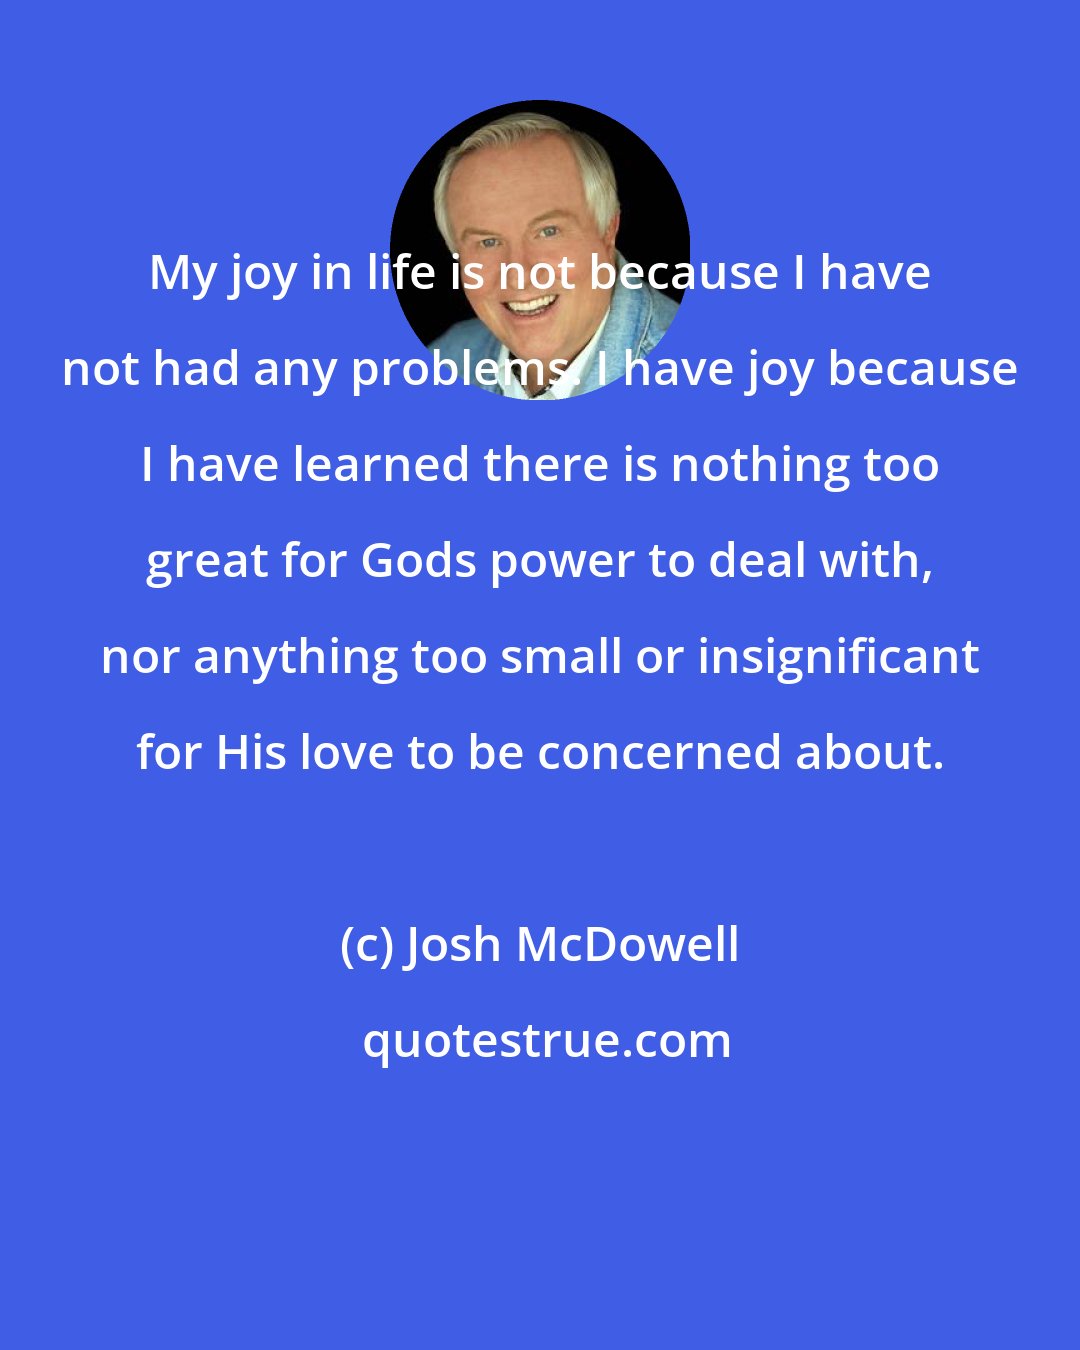 Josh McDowell: My joy in life is not because I have not had any problems. I have joy because I have learned there is nothing too great for Gods power to deal with, nor anything too small or insignificant for His love to be concerned about.